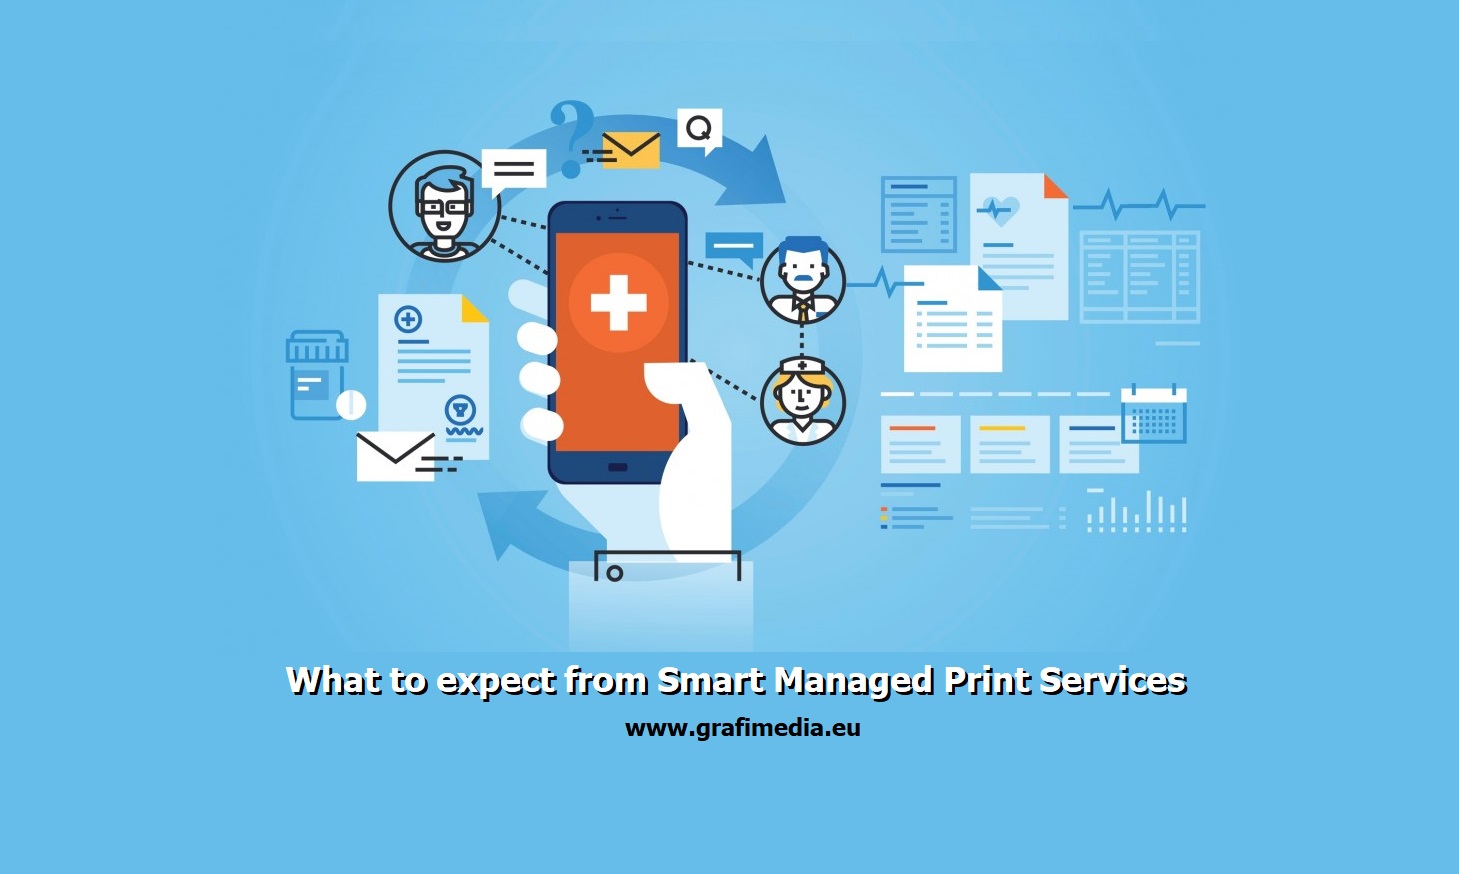 What to expect from Smart Managed Print Services by Grafimedia